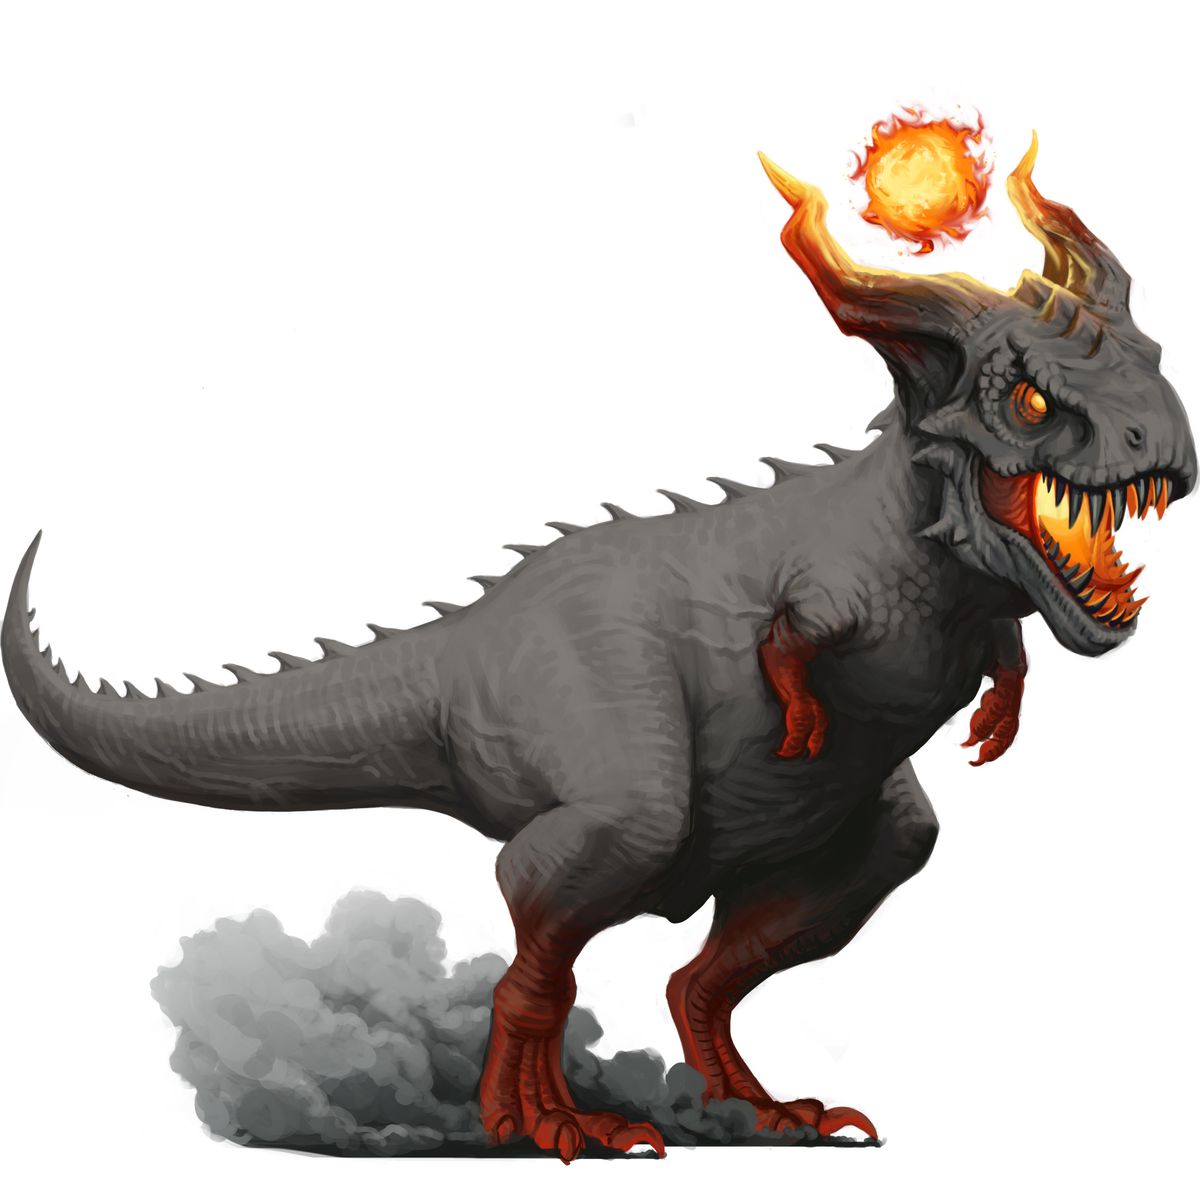 A large grey dynosaur shaped roughly like a t-rex, but with horns and a fireball over its head.